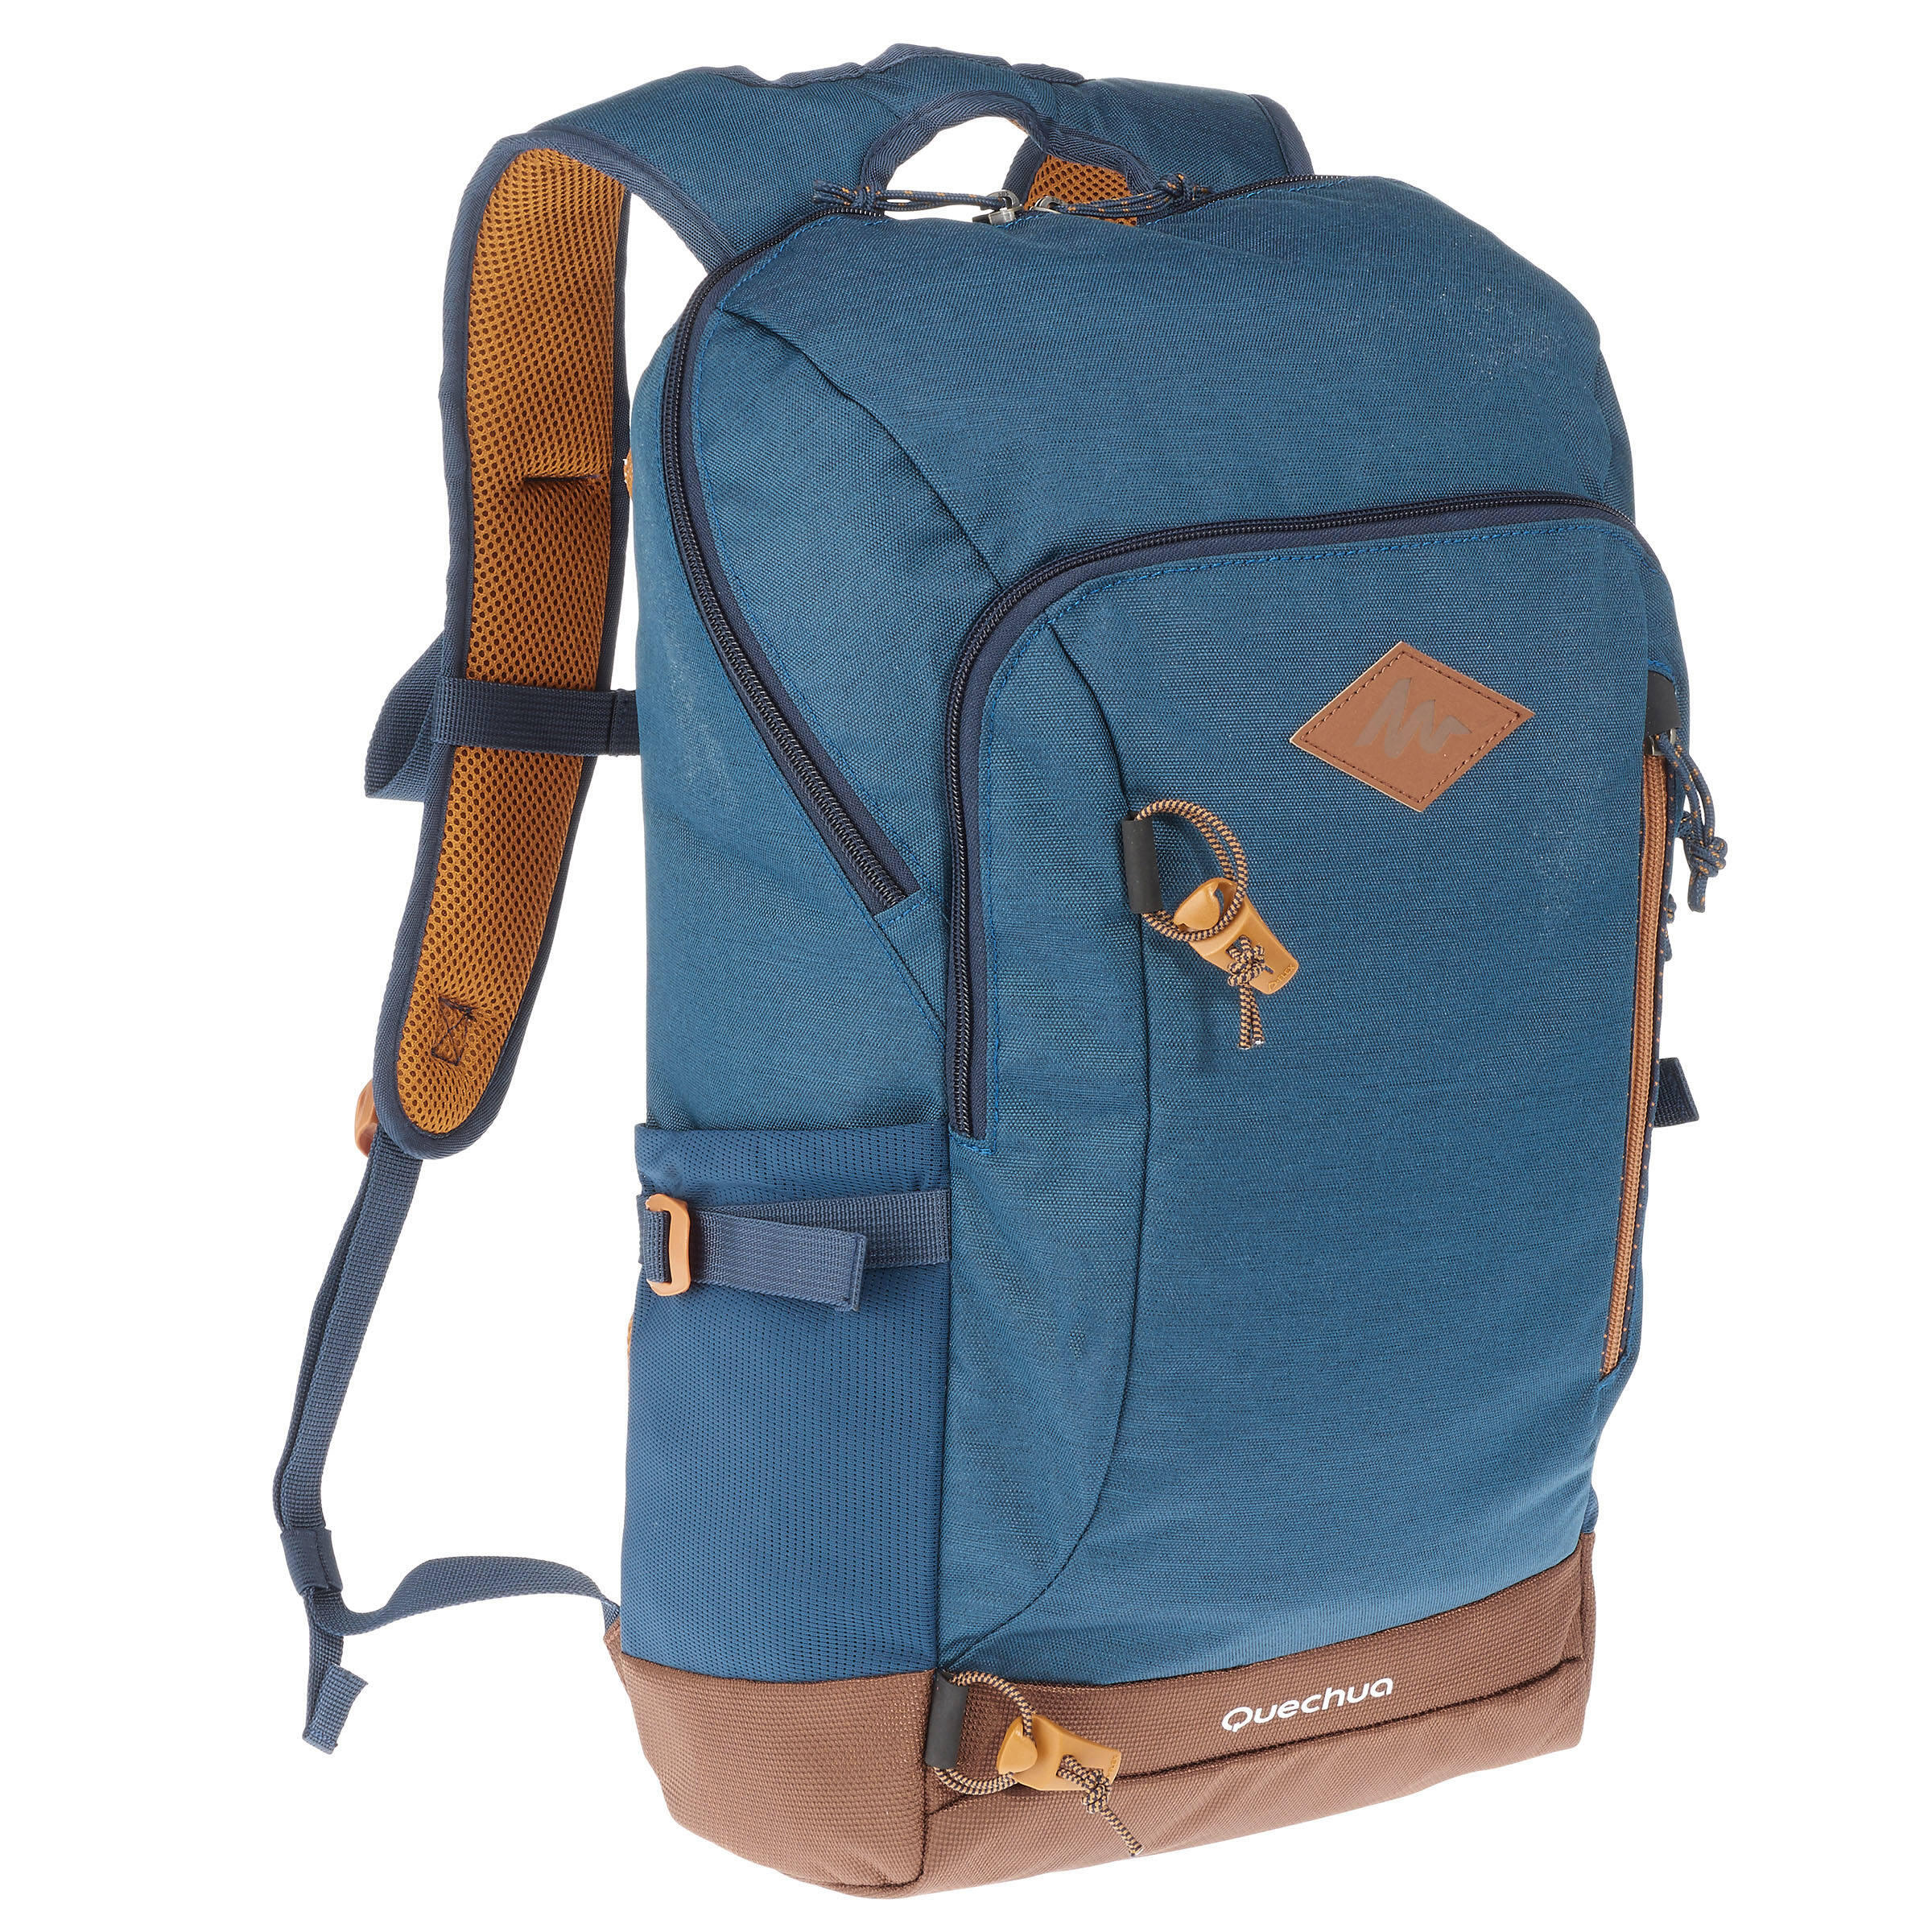 Country Walking Backpack - NH500 20 